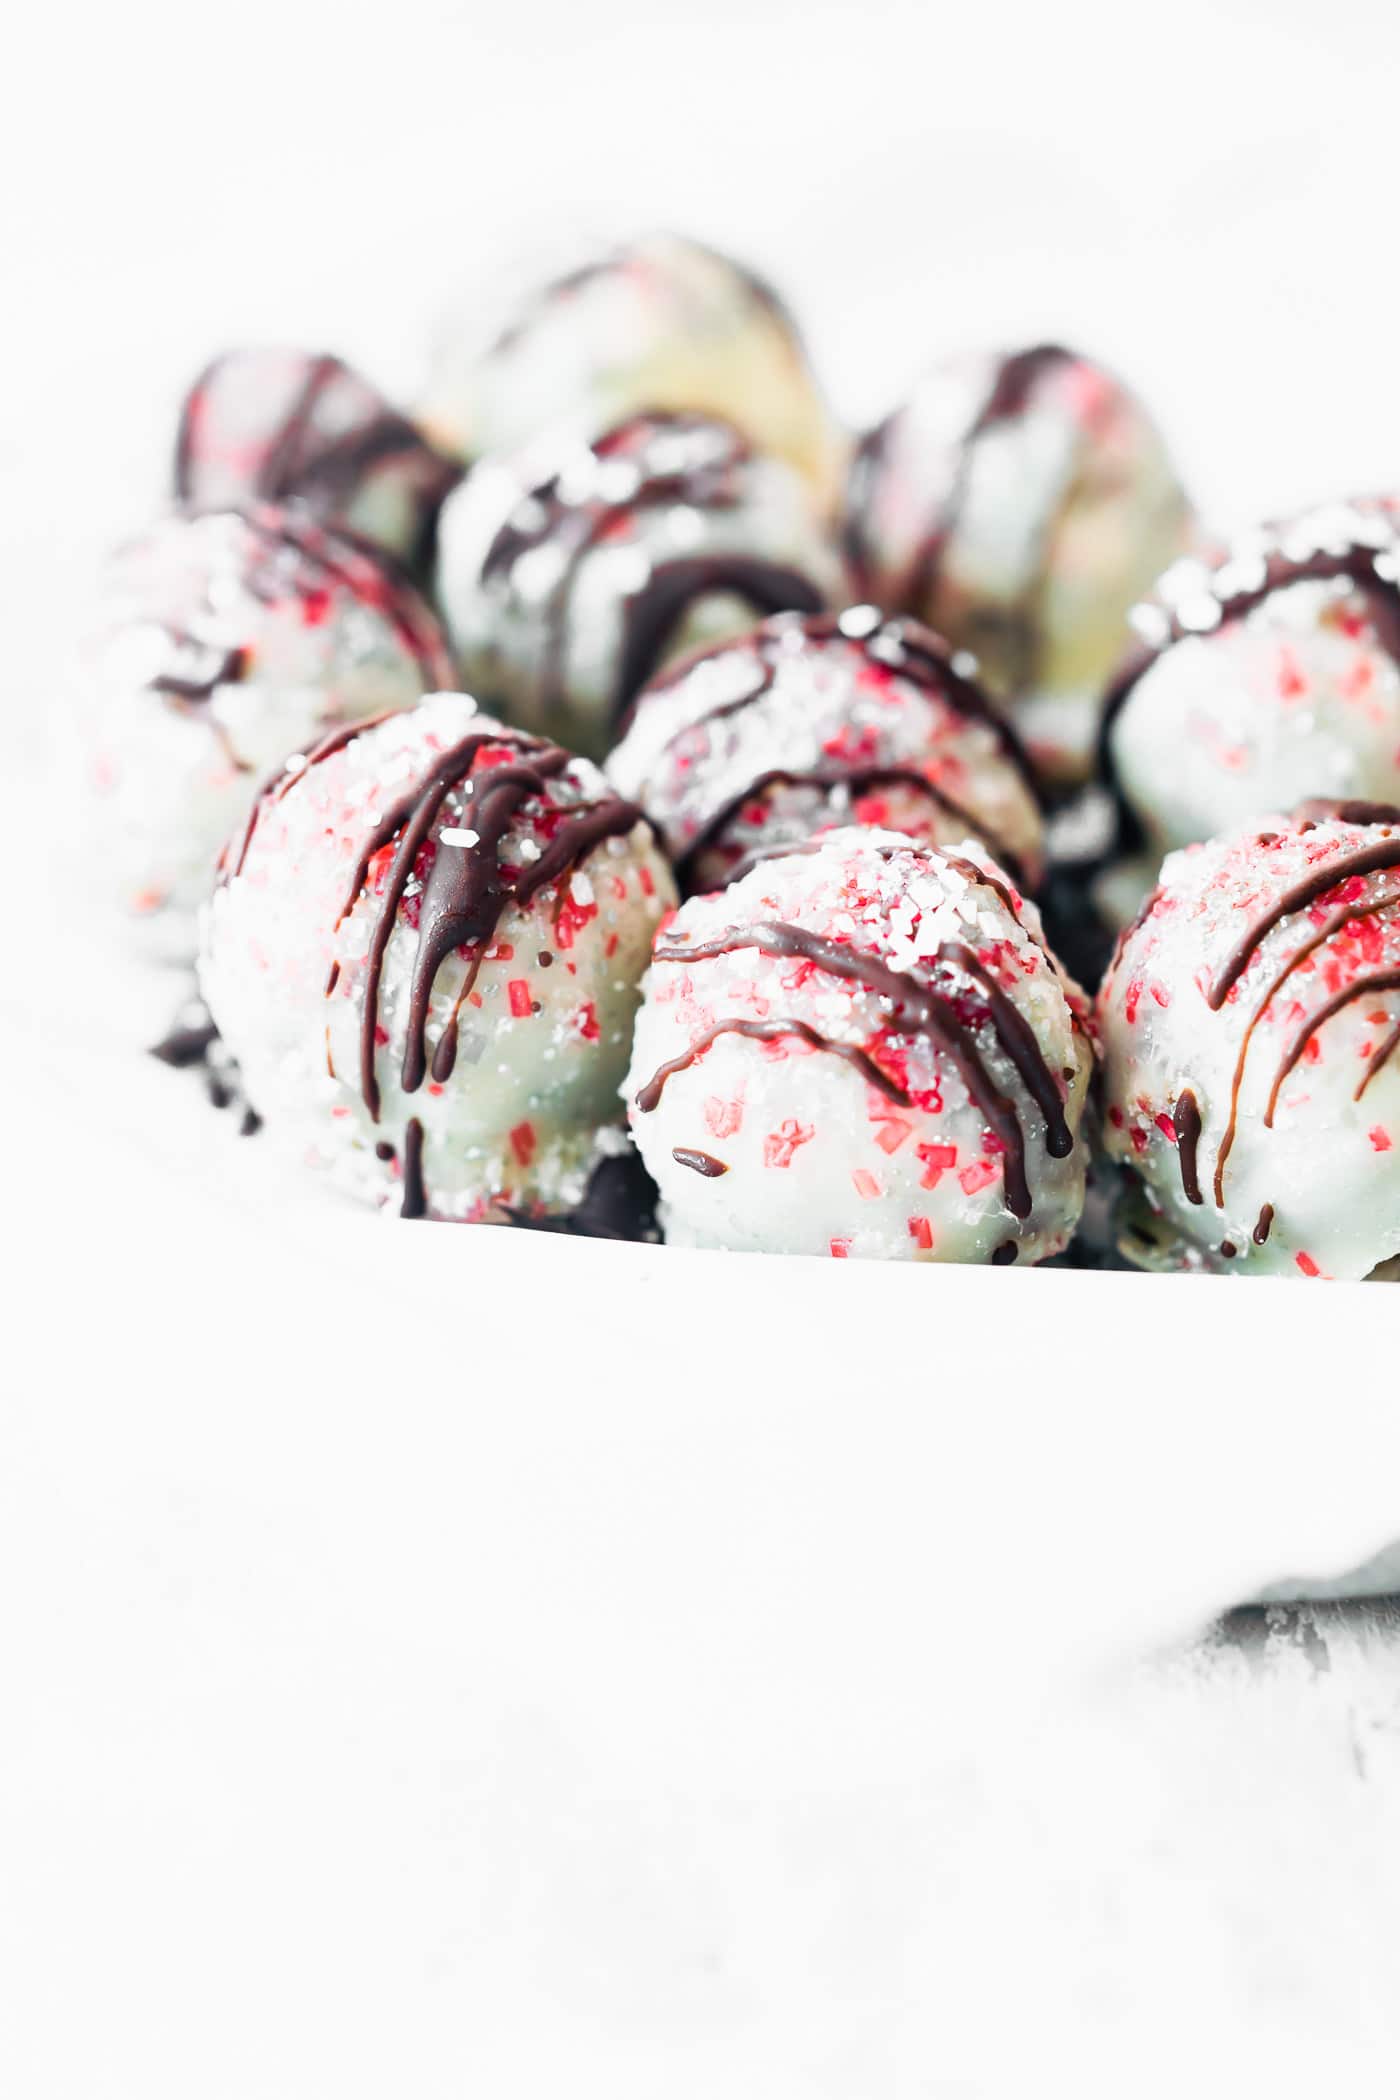 Several white chocolate coated peppermint rum balls with dark chocolate drizzled over top with red sprinkles.